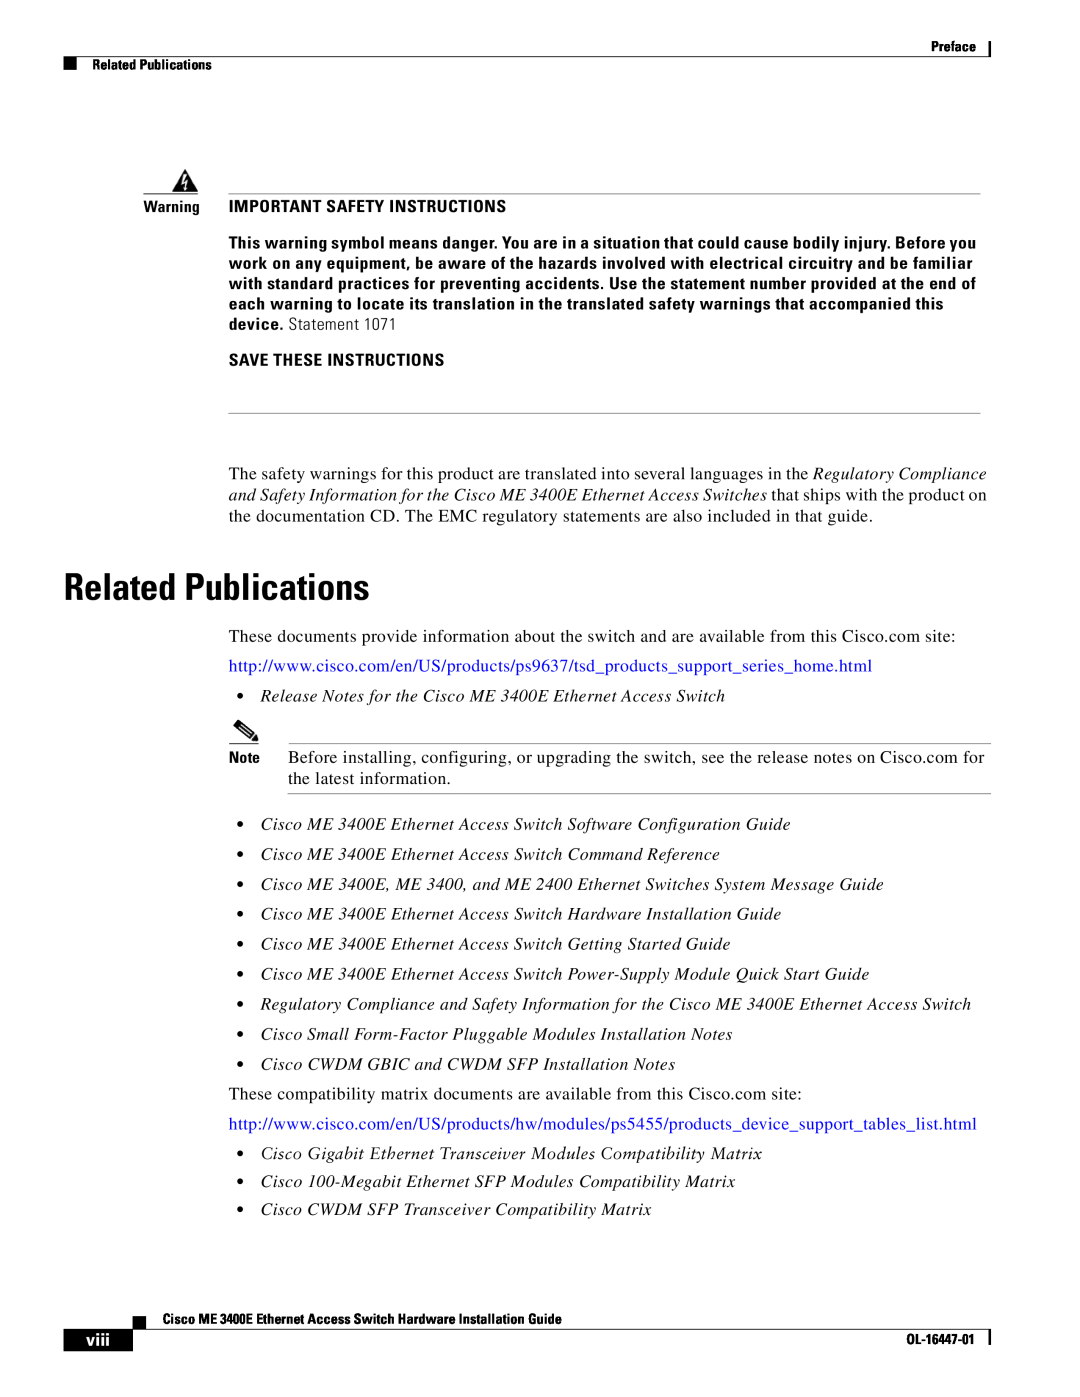 Cisco Systems OL-16447-01 manual Related Publications, Release Notes for the Cisco ME 3400E Ethernet Access Switch, viii 